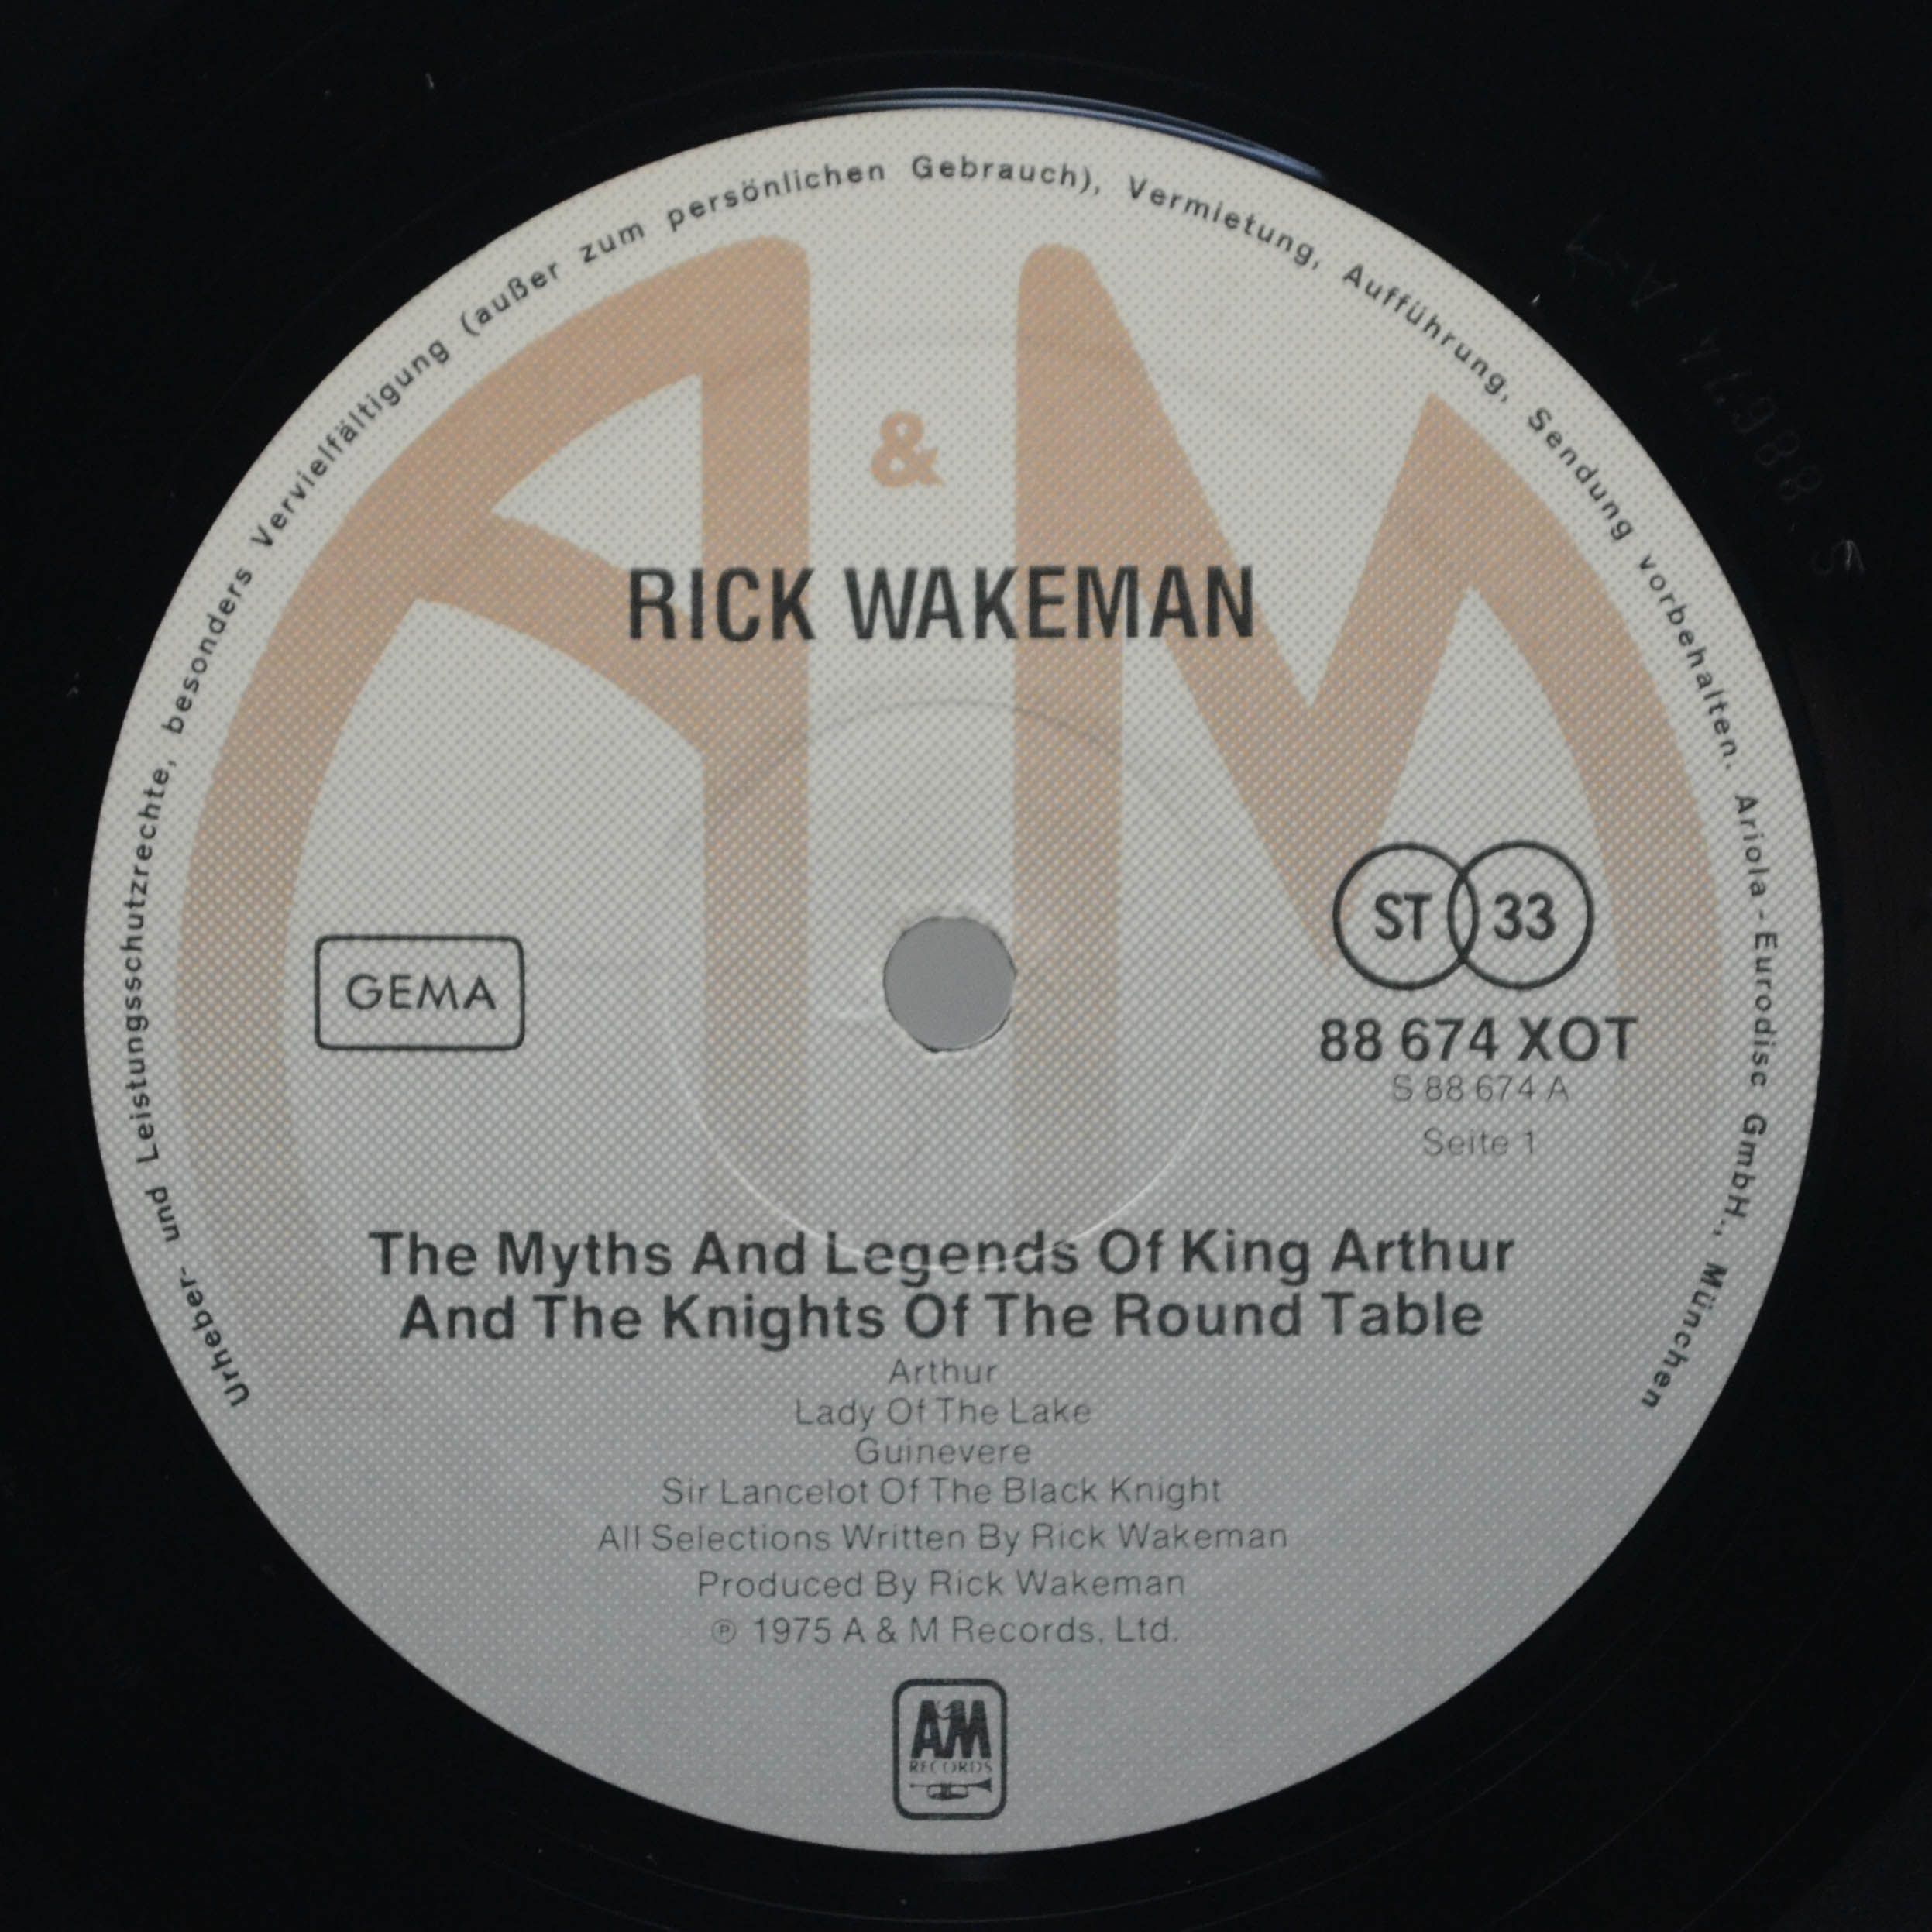 Rick Wakeman — The Myths And Legends Of King Arthur And The Knights Of The Round Table, 1975